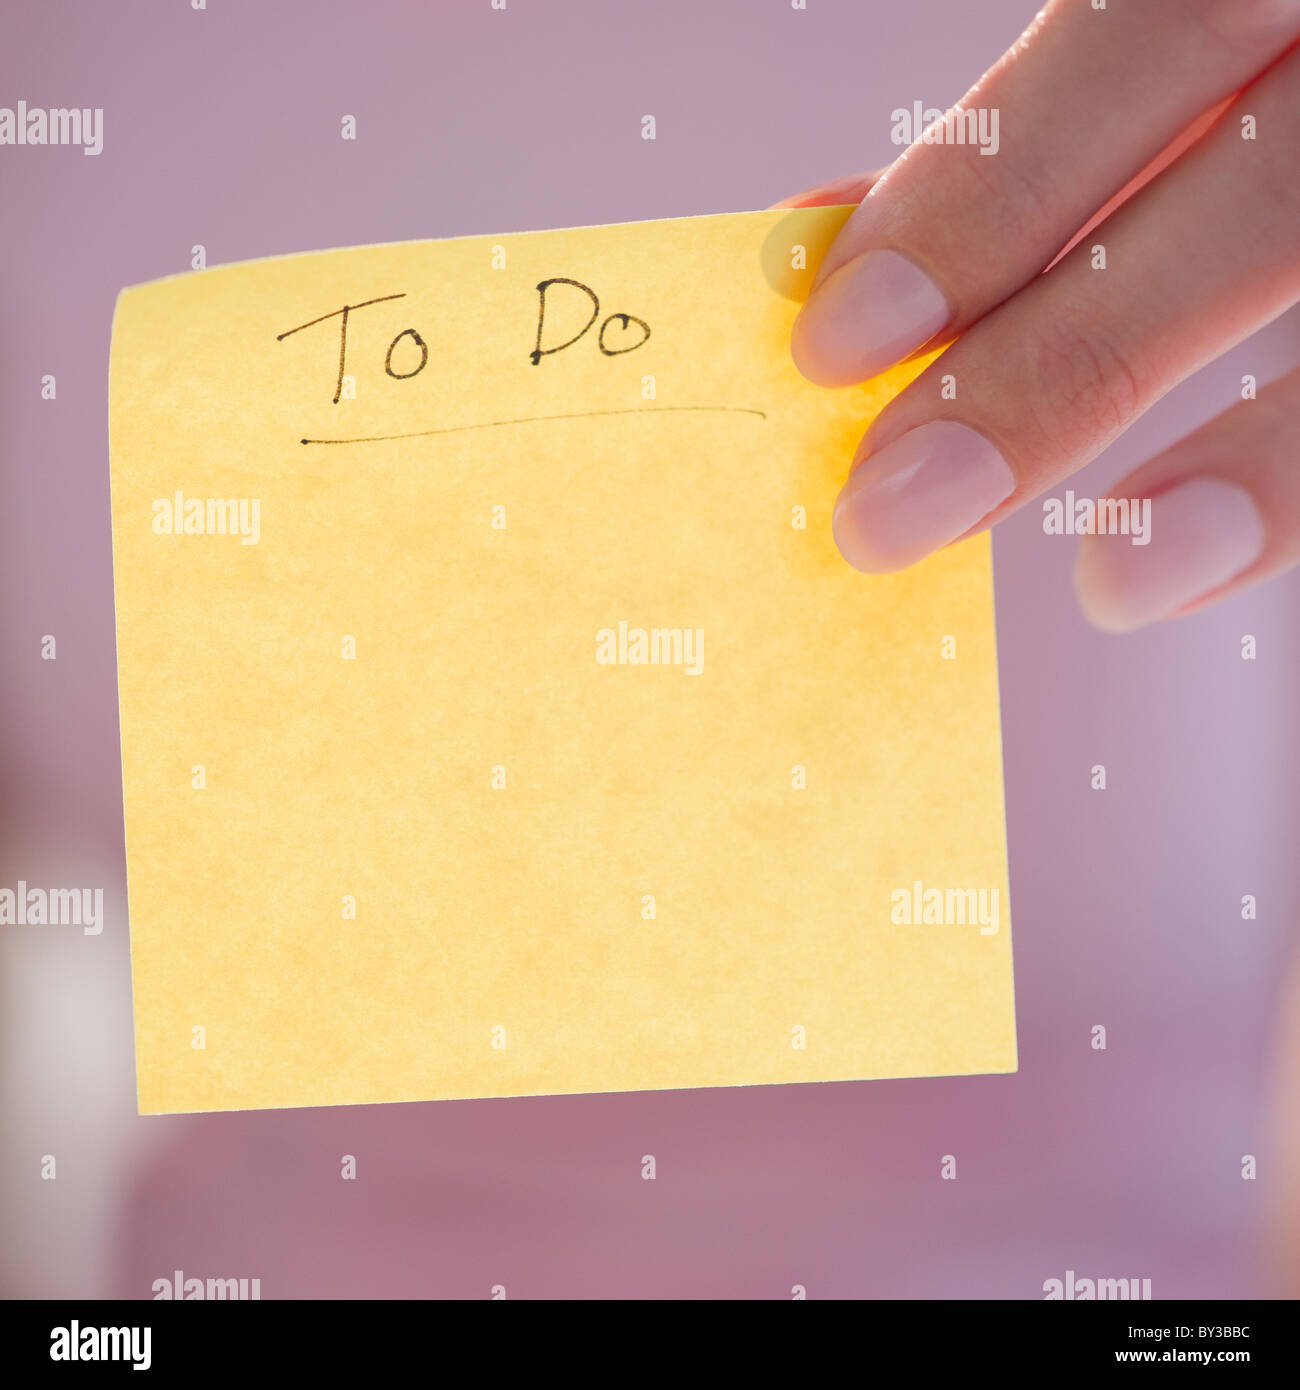 USA, New Jersey, Jersey City, Close-up view of woman hand holding adhesive note for writing down things to do Stock Photo